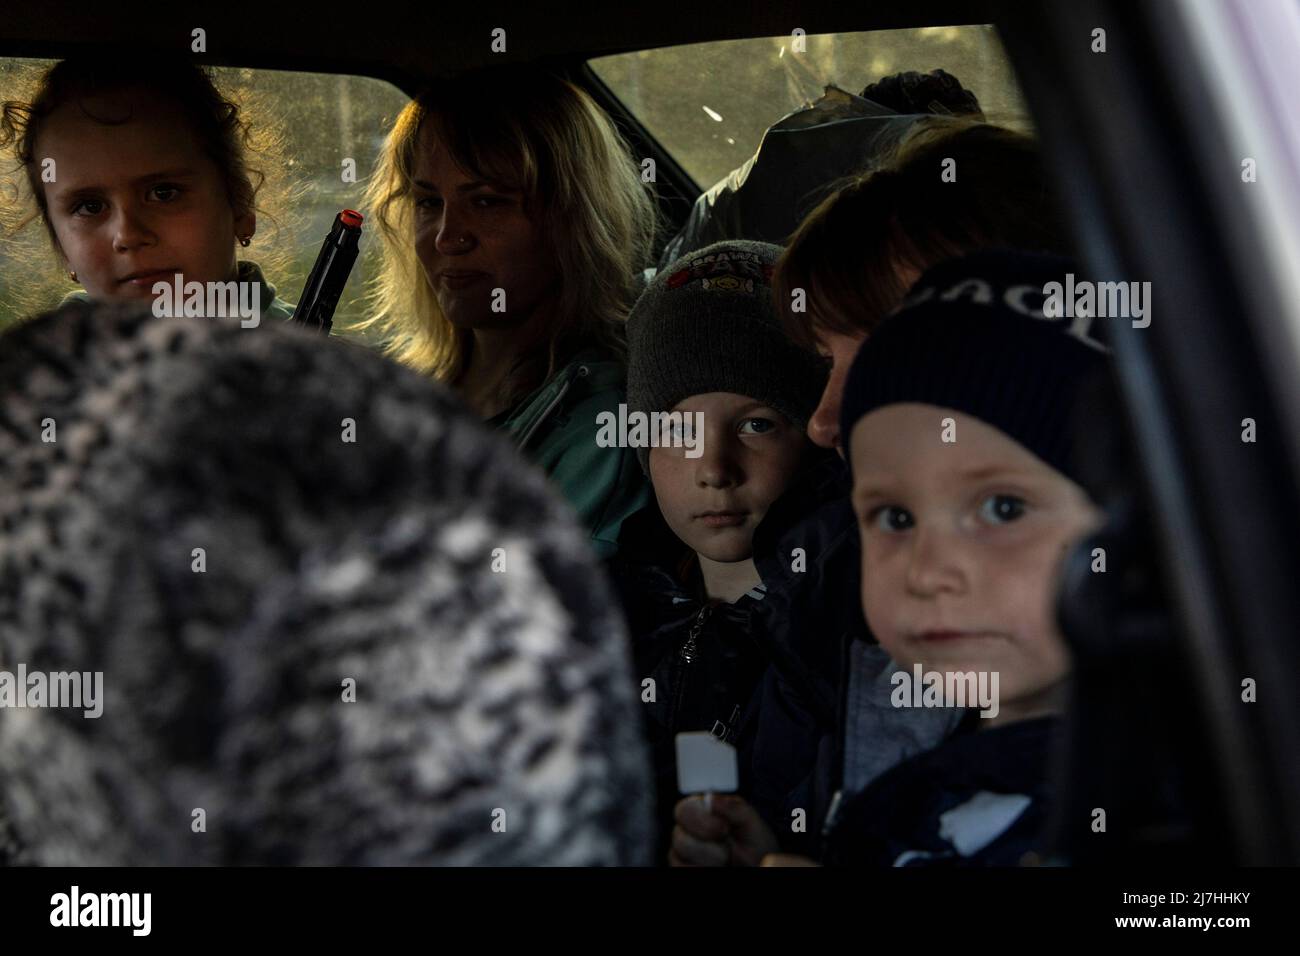 Sophia (L1, 7), Igor (L3, 8) Sergei (L4, 2.5) are seen packed in the car with their parents as they depart to other cities after arriving in Zaporizhia from Kherson on Sunday. Amid the intensified war crisis in Southeast Ukraine, millions of Ukrainian families have now been evacuated from the war zones and Russia controlled territories to Ukraine controlled territories, Zaporizhia.According to the United Nations, more than 11 million people are believed to have fled their homes in Ukraine since the conflict began, with 7.7 million people displaced inside their homeland. (Photo by Alex Chan Tsz Stock Photo